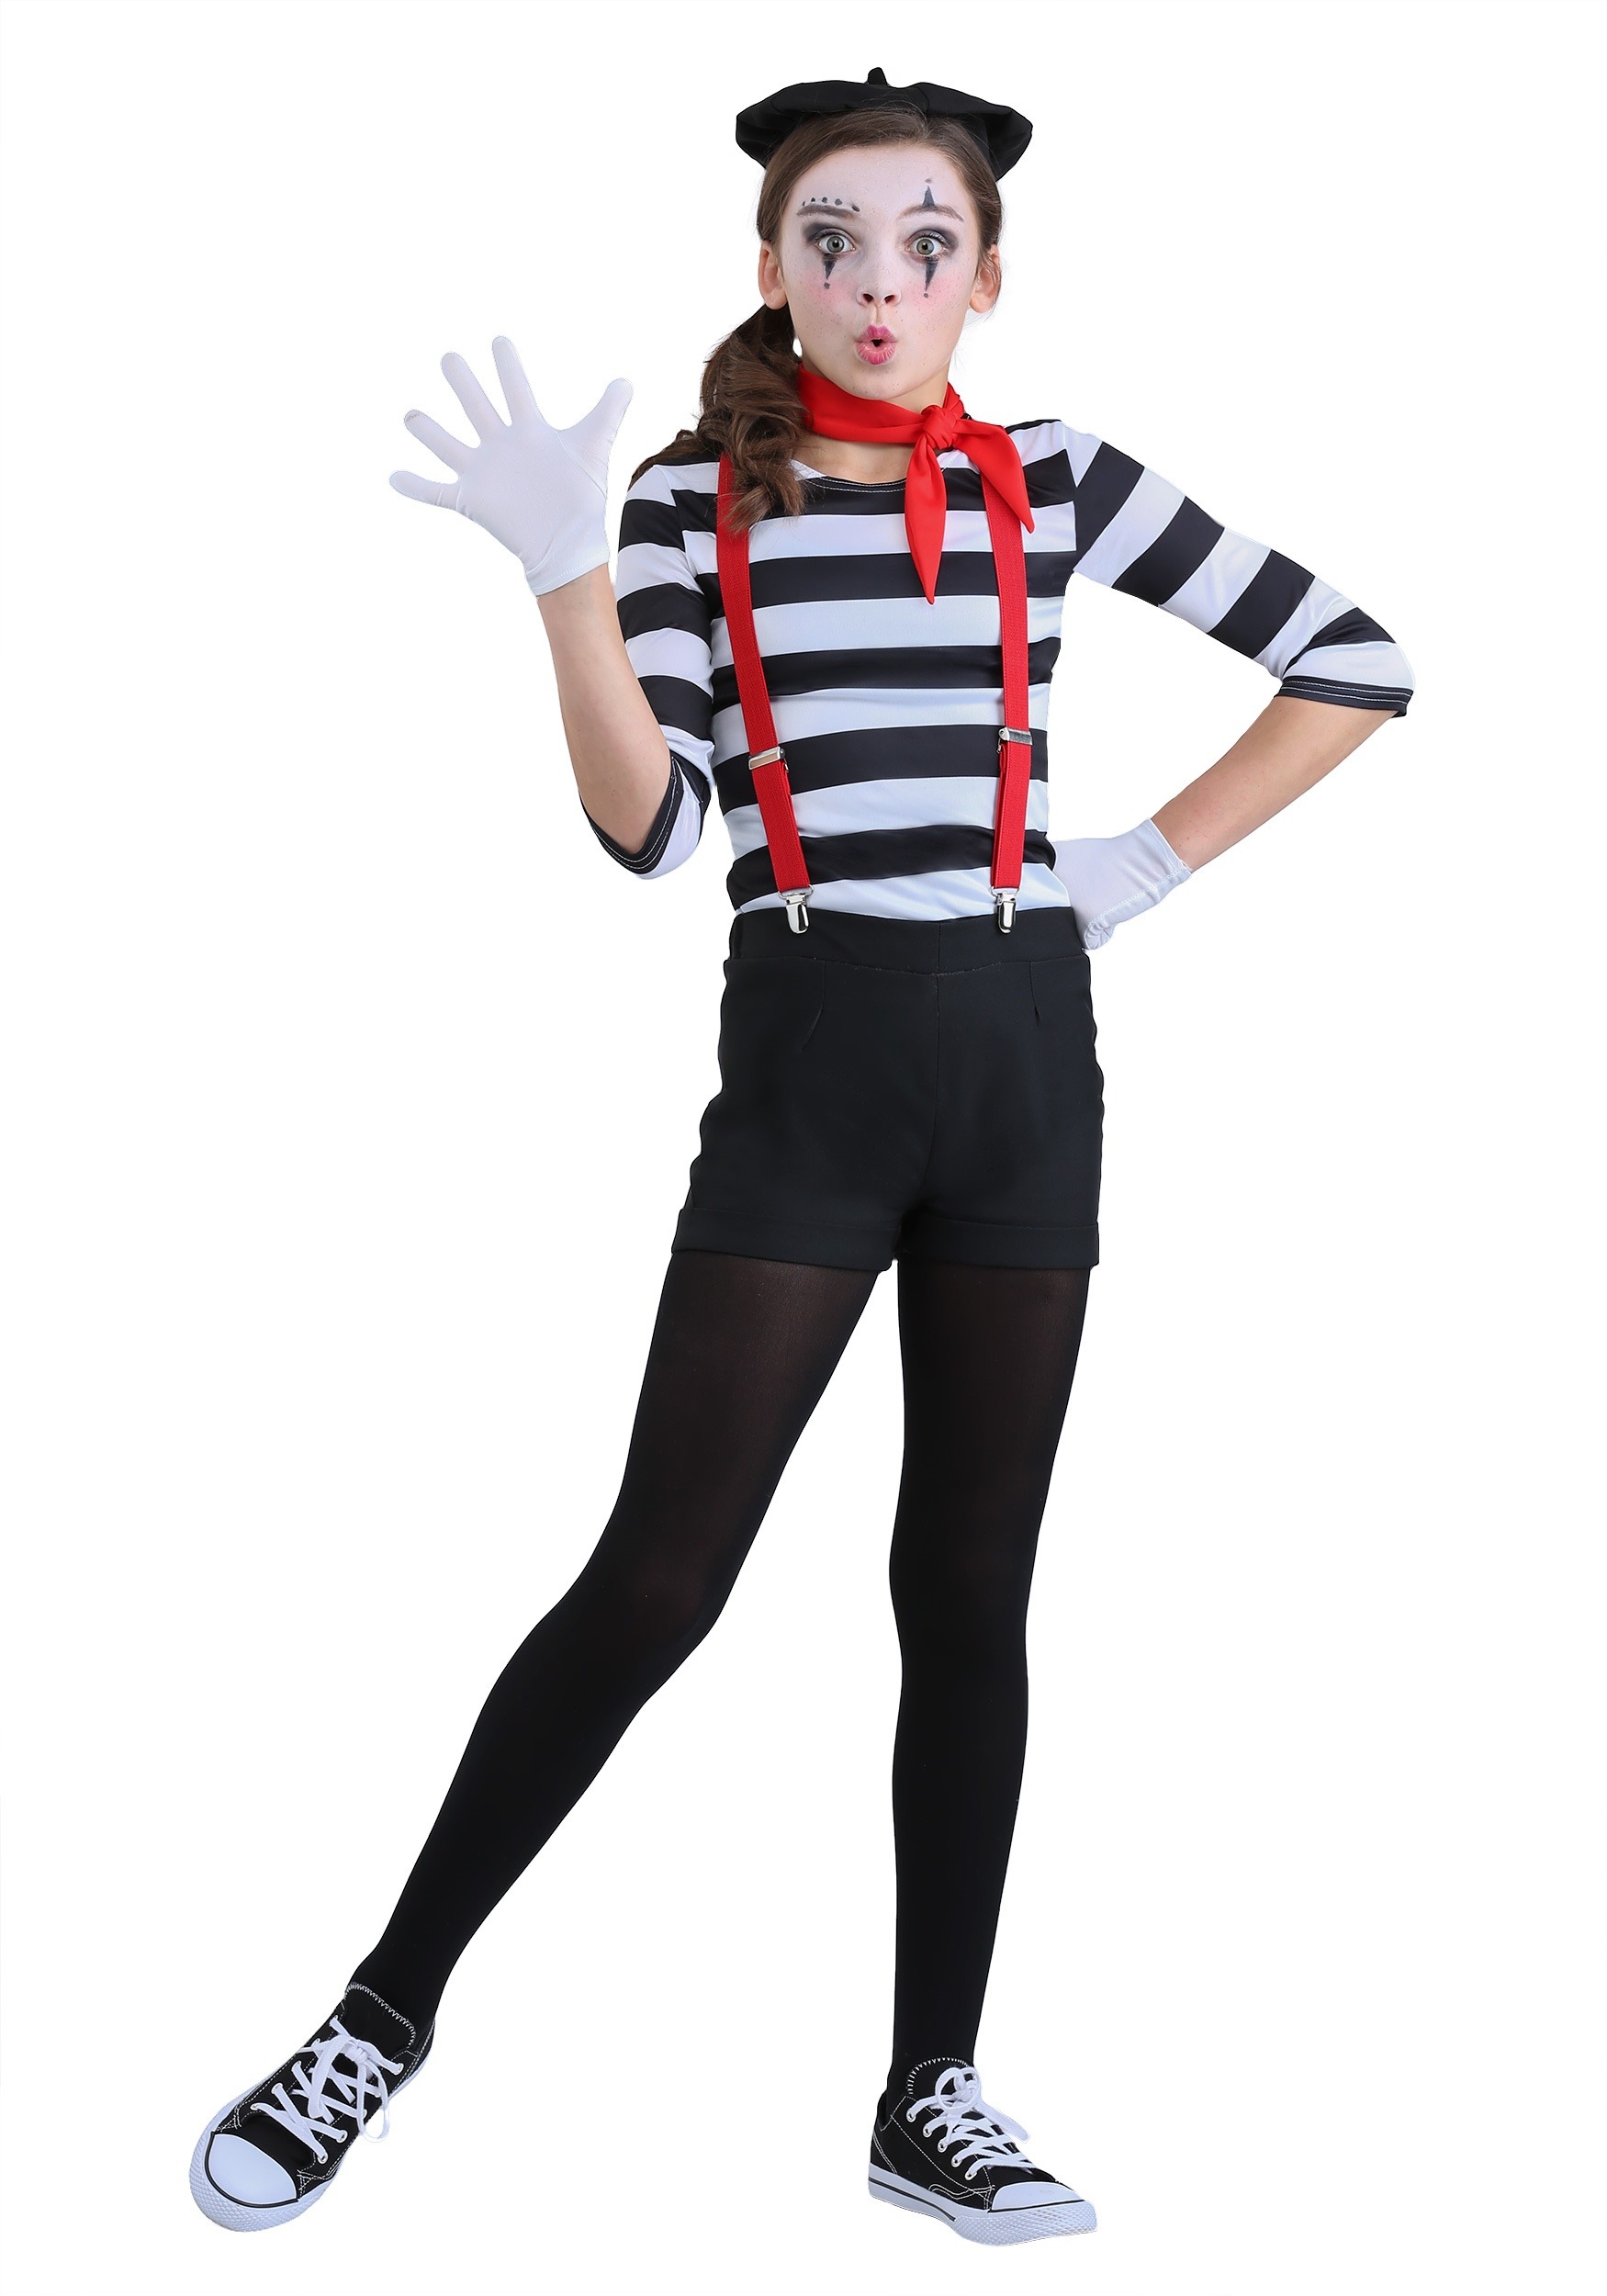 Photos - Fancy Dress FUN Costumes Mime Costume for Girls Black/Red/White FUN2987CH